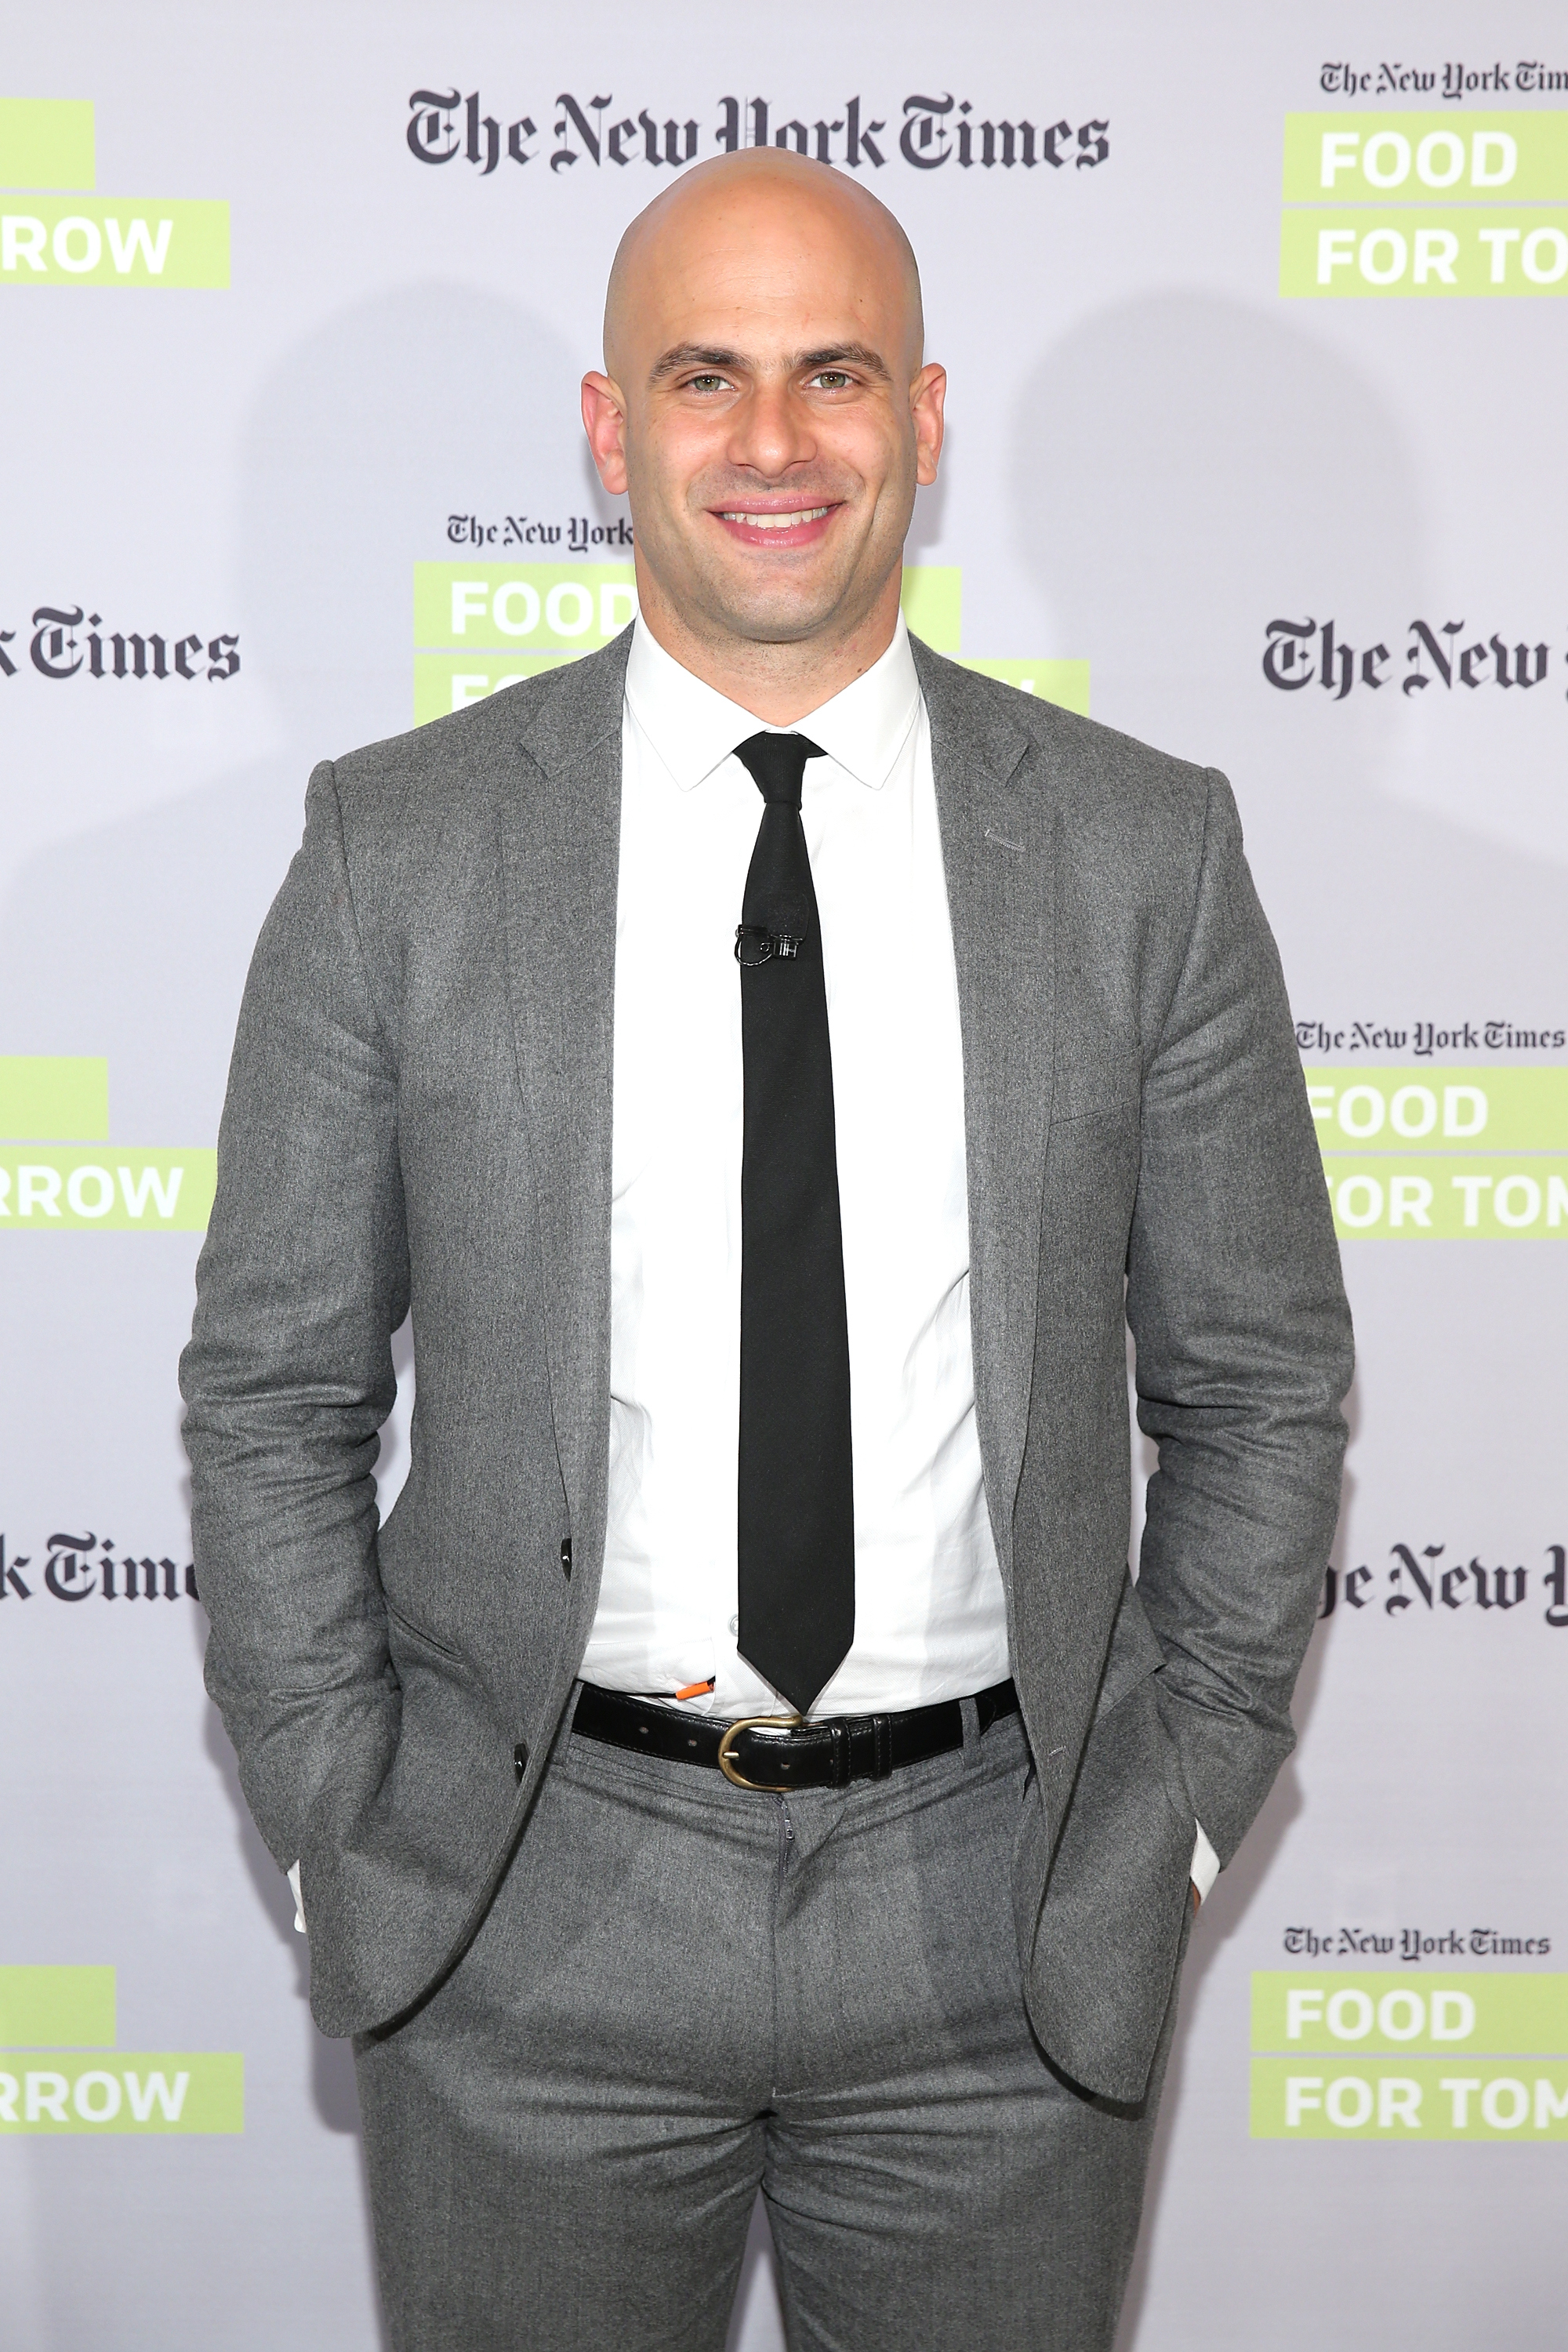 Former White House chef Sam Kass at The New York Times Food For Tomorrow Conference At Stone Barns, New York, on Nov. 12, 2014. (Neilson Barnard—Getty Images)